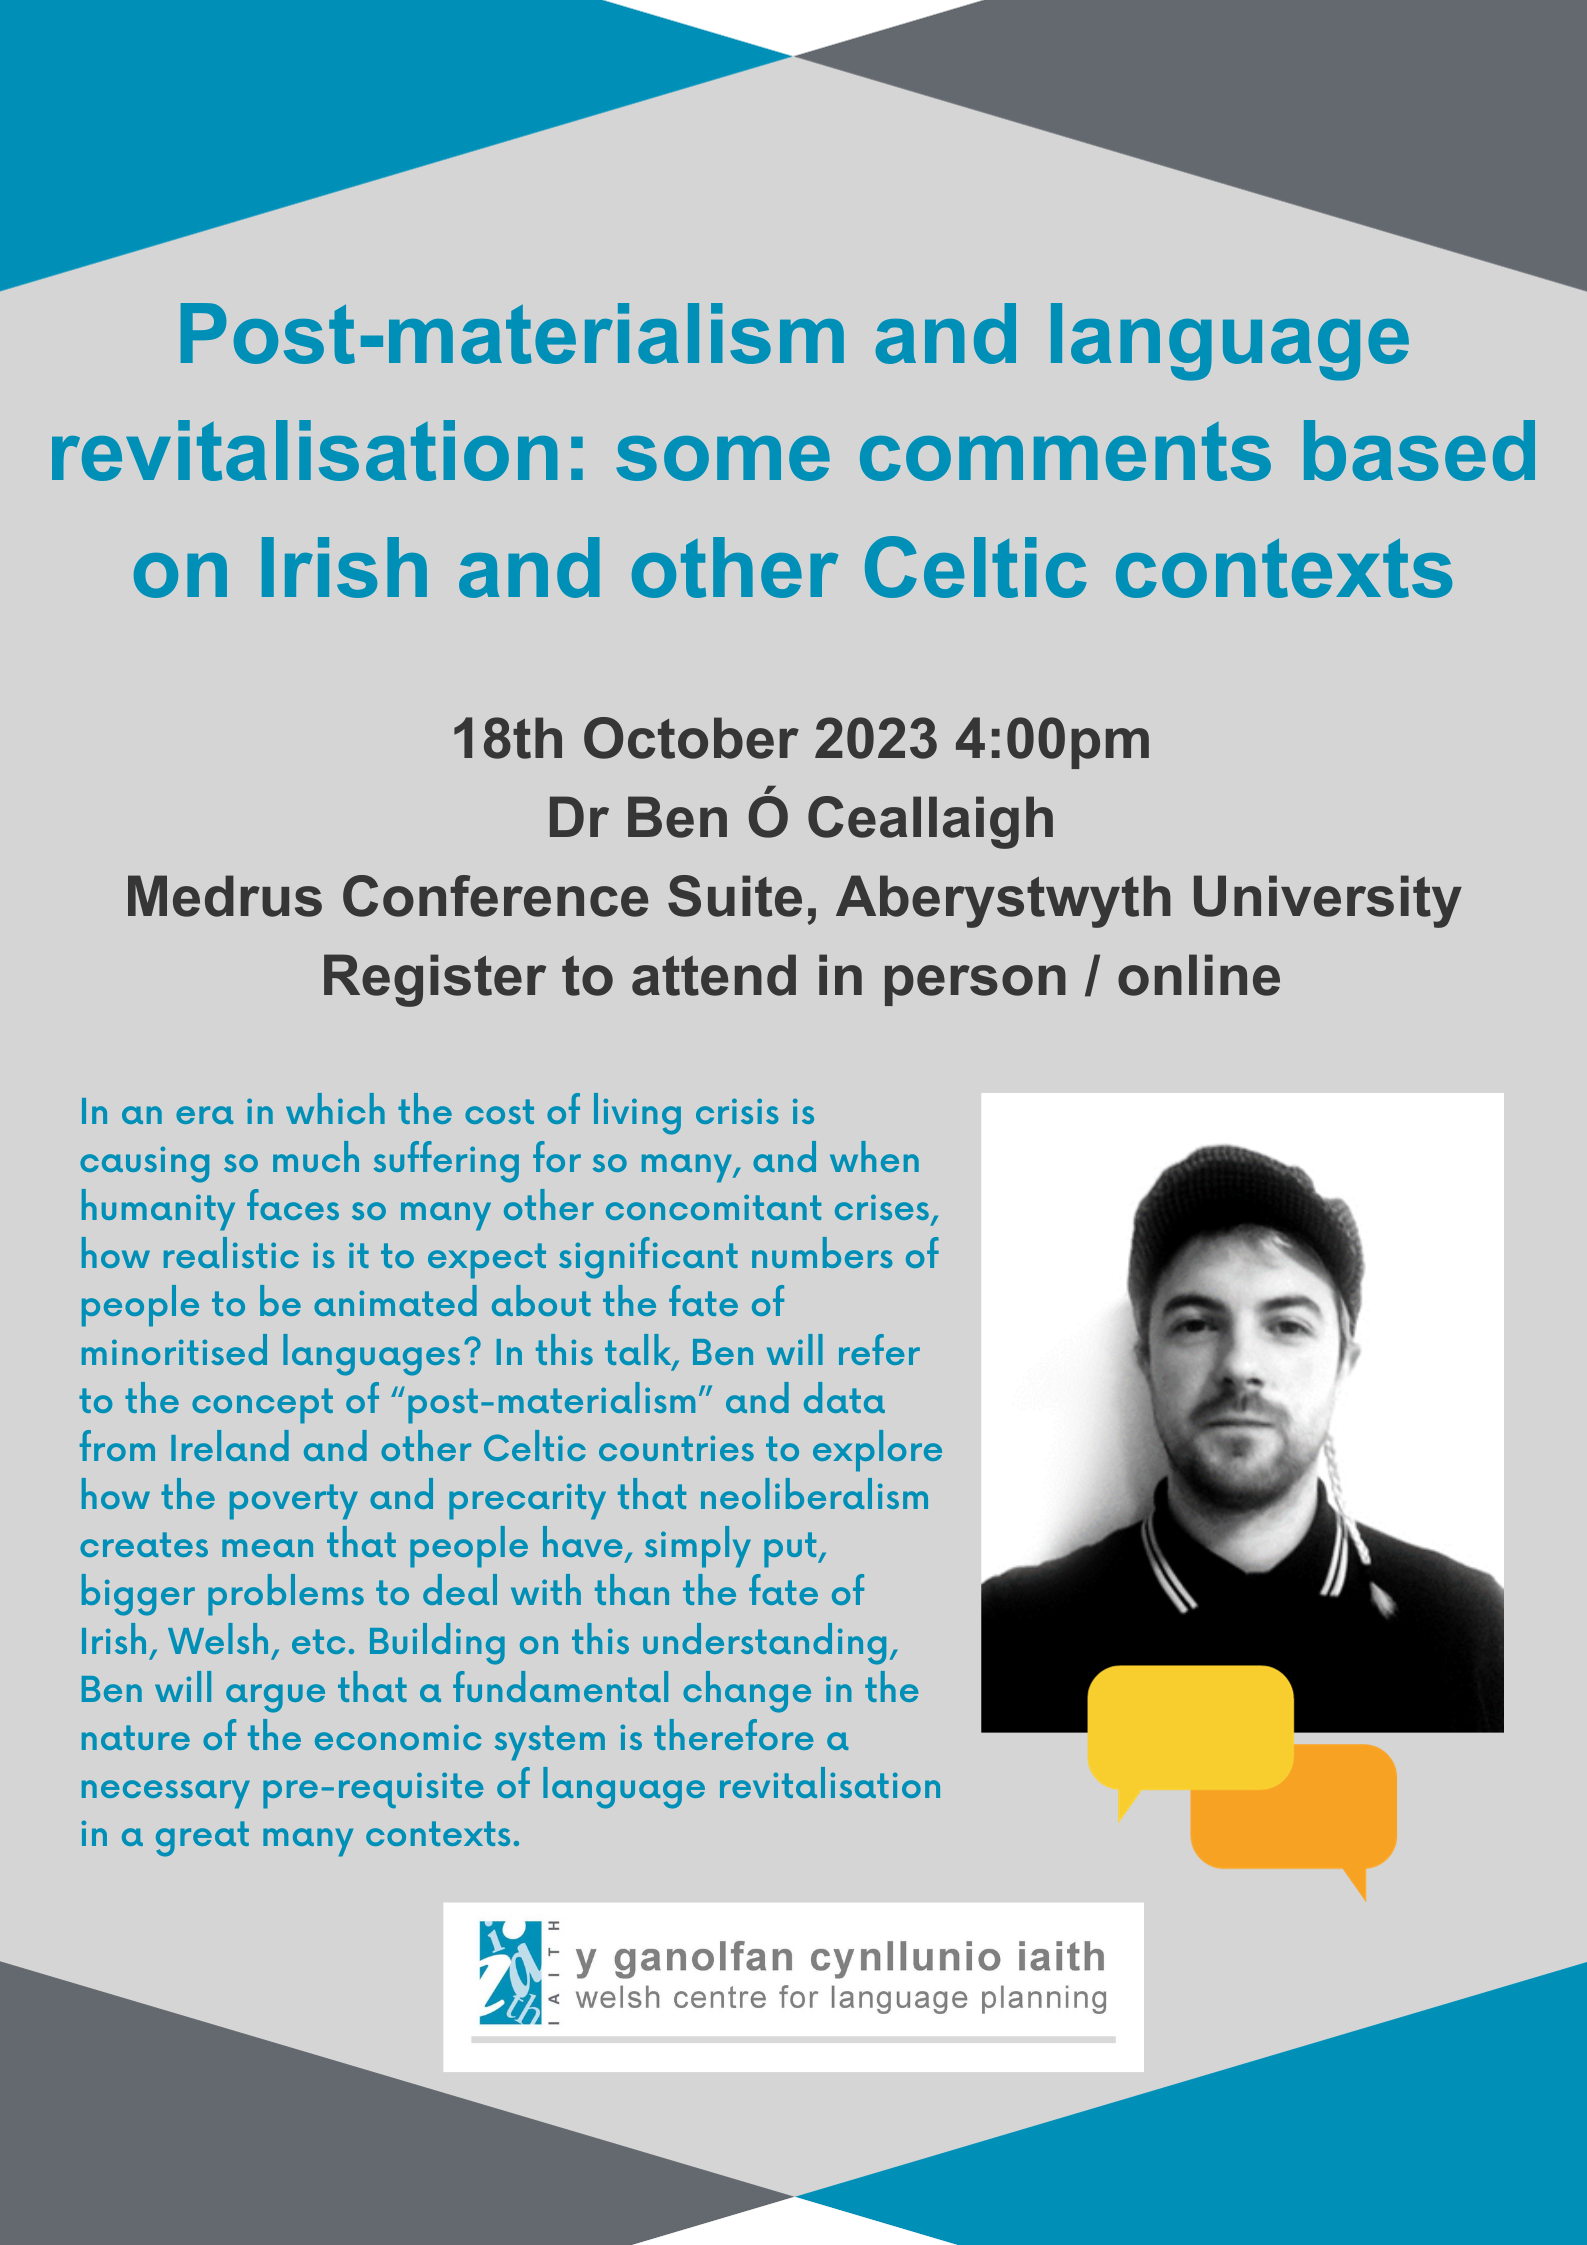 Post-materialism and language revitalisation: some comments based on Irish and other Celtic contexts